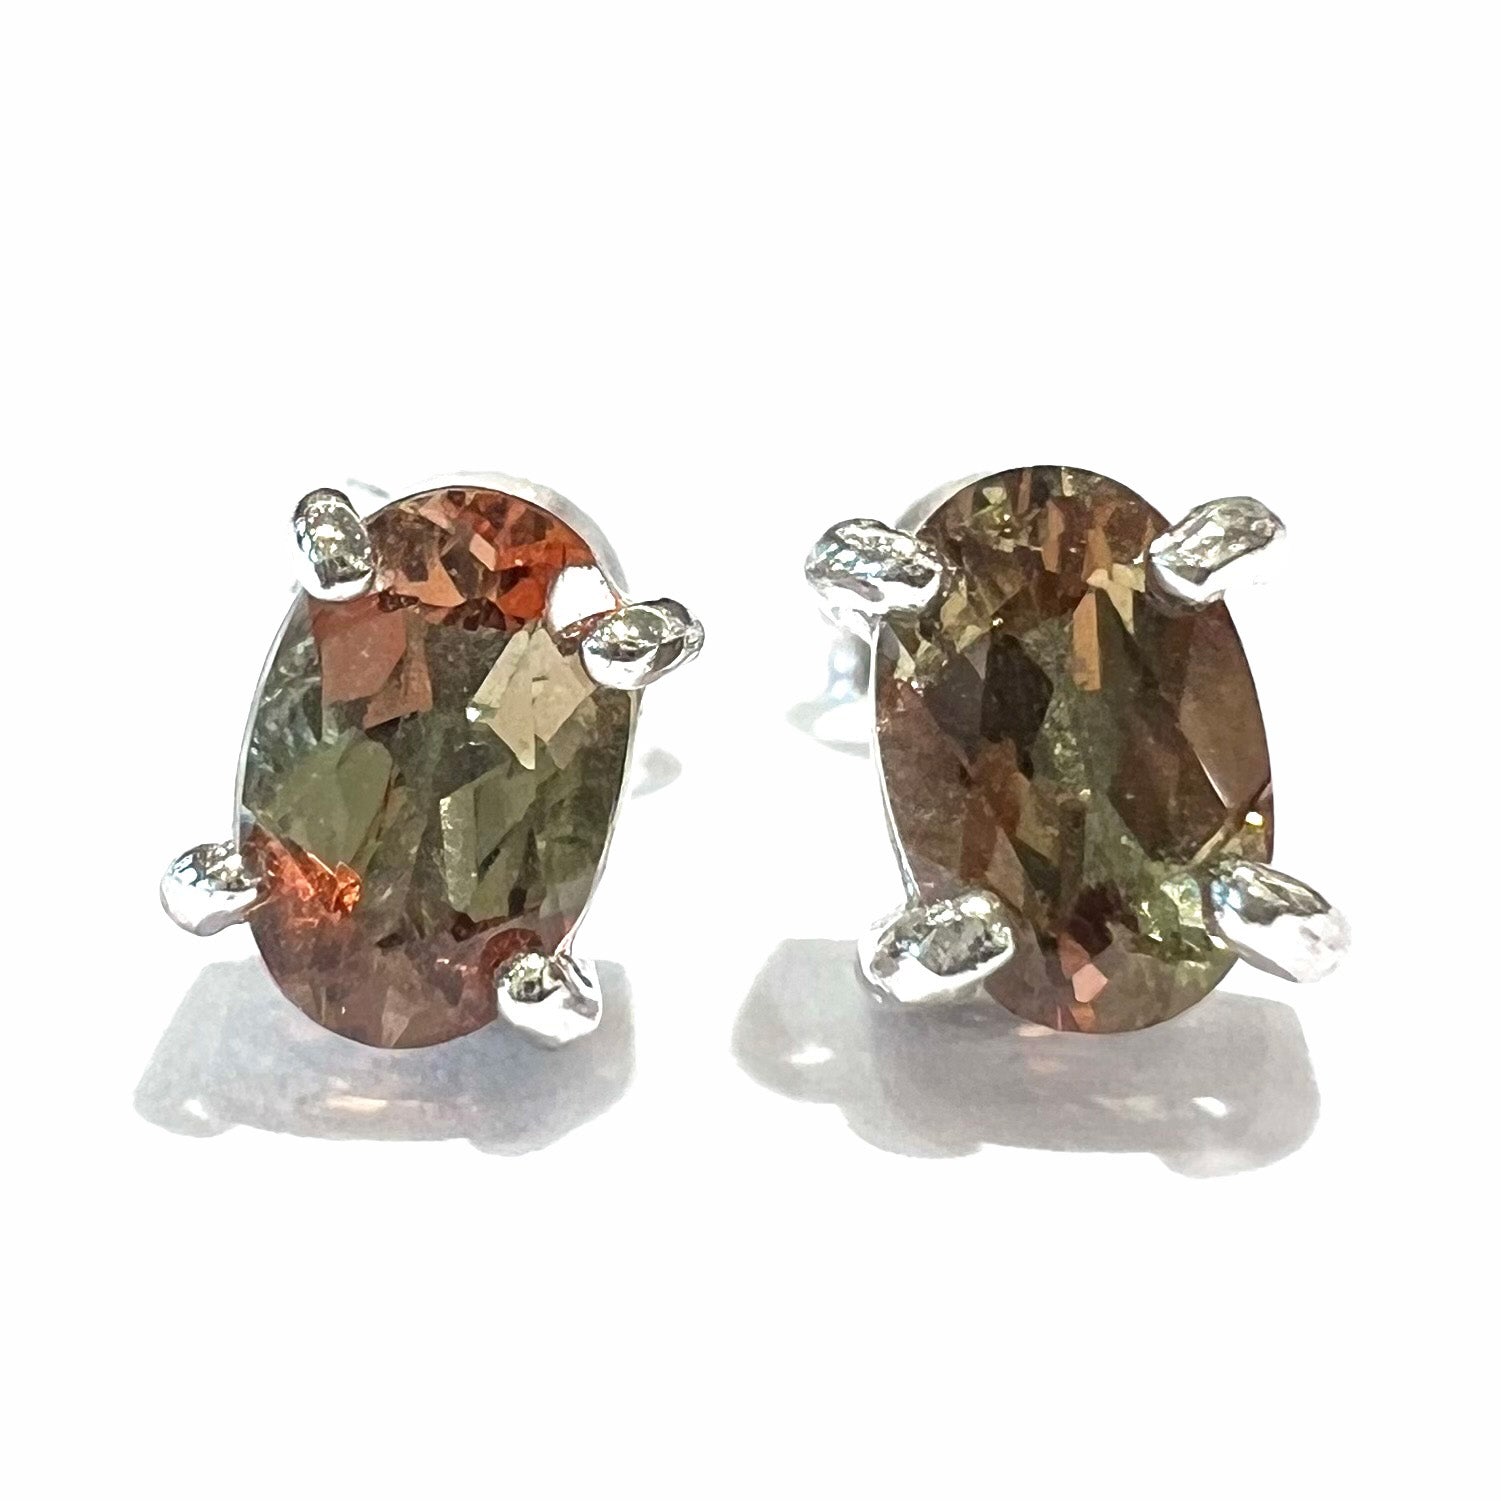 A pair of sterling silver stud earrings prong set with oval cut andalusite stones.